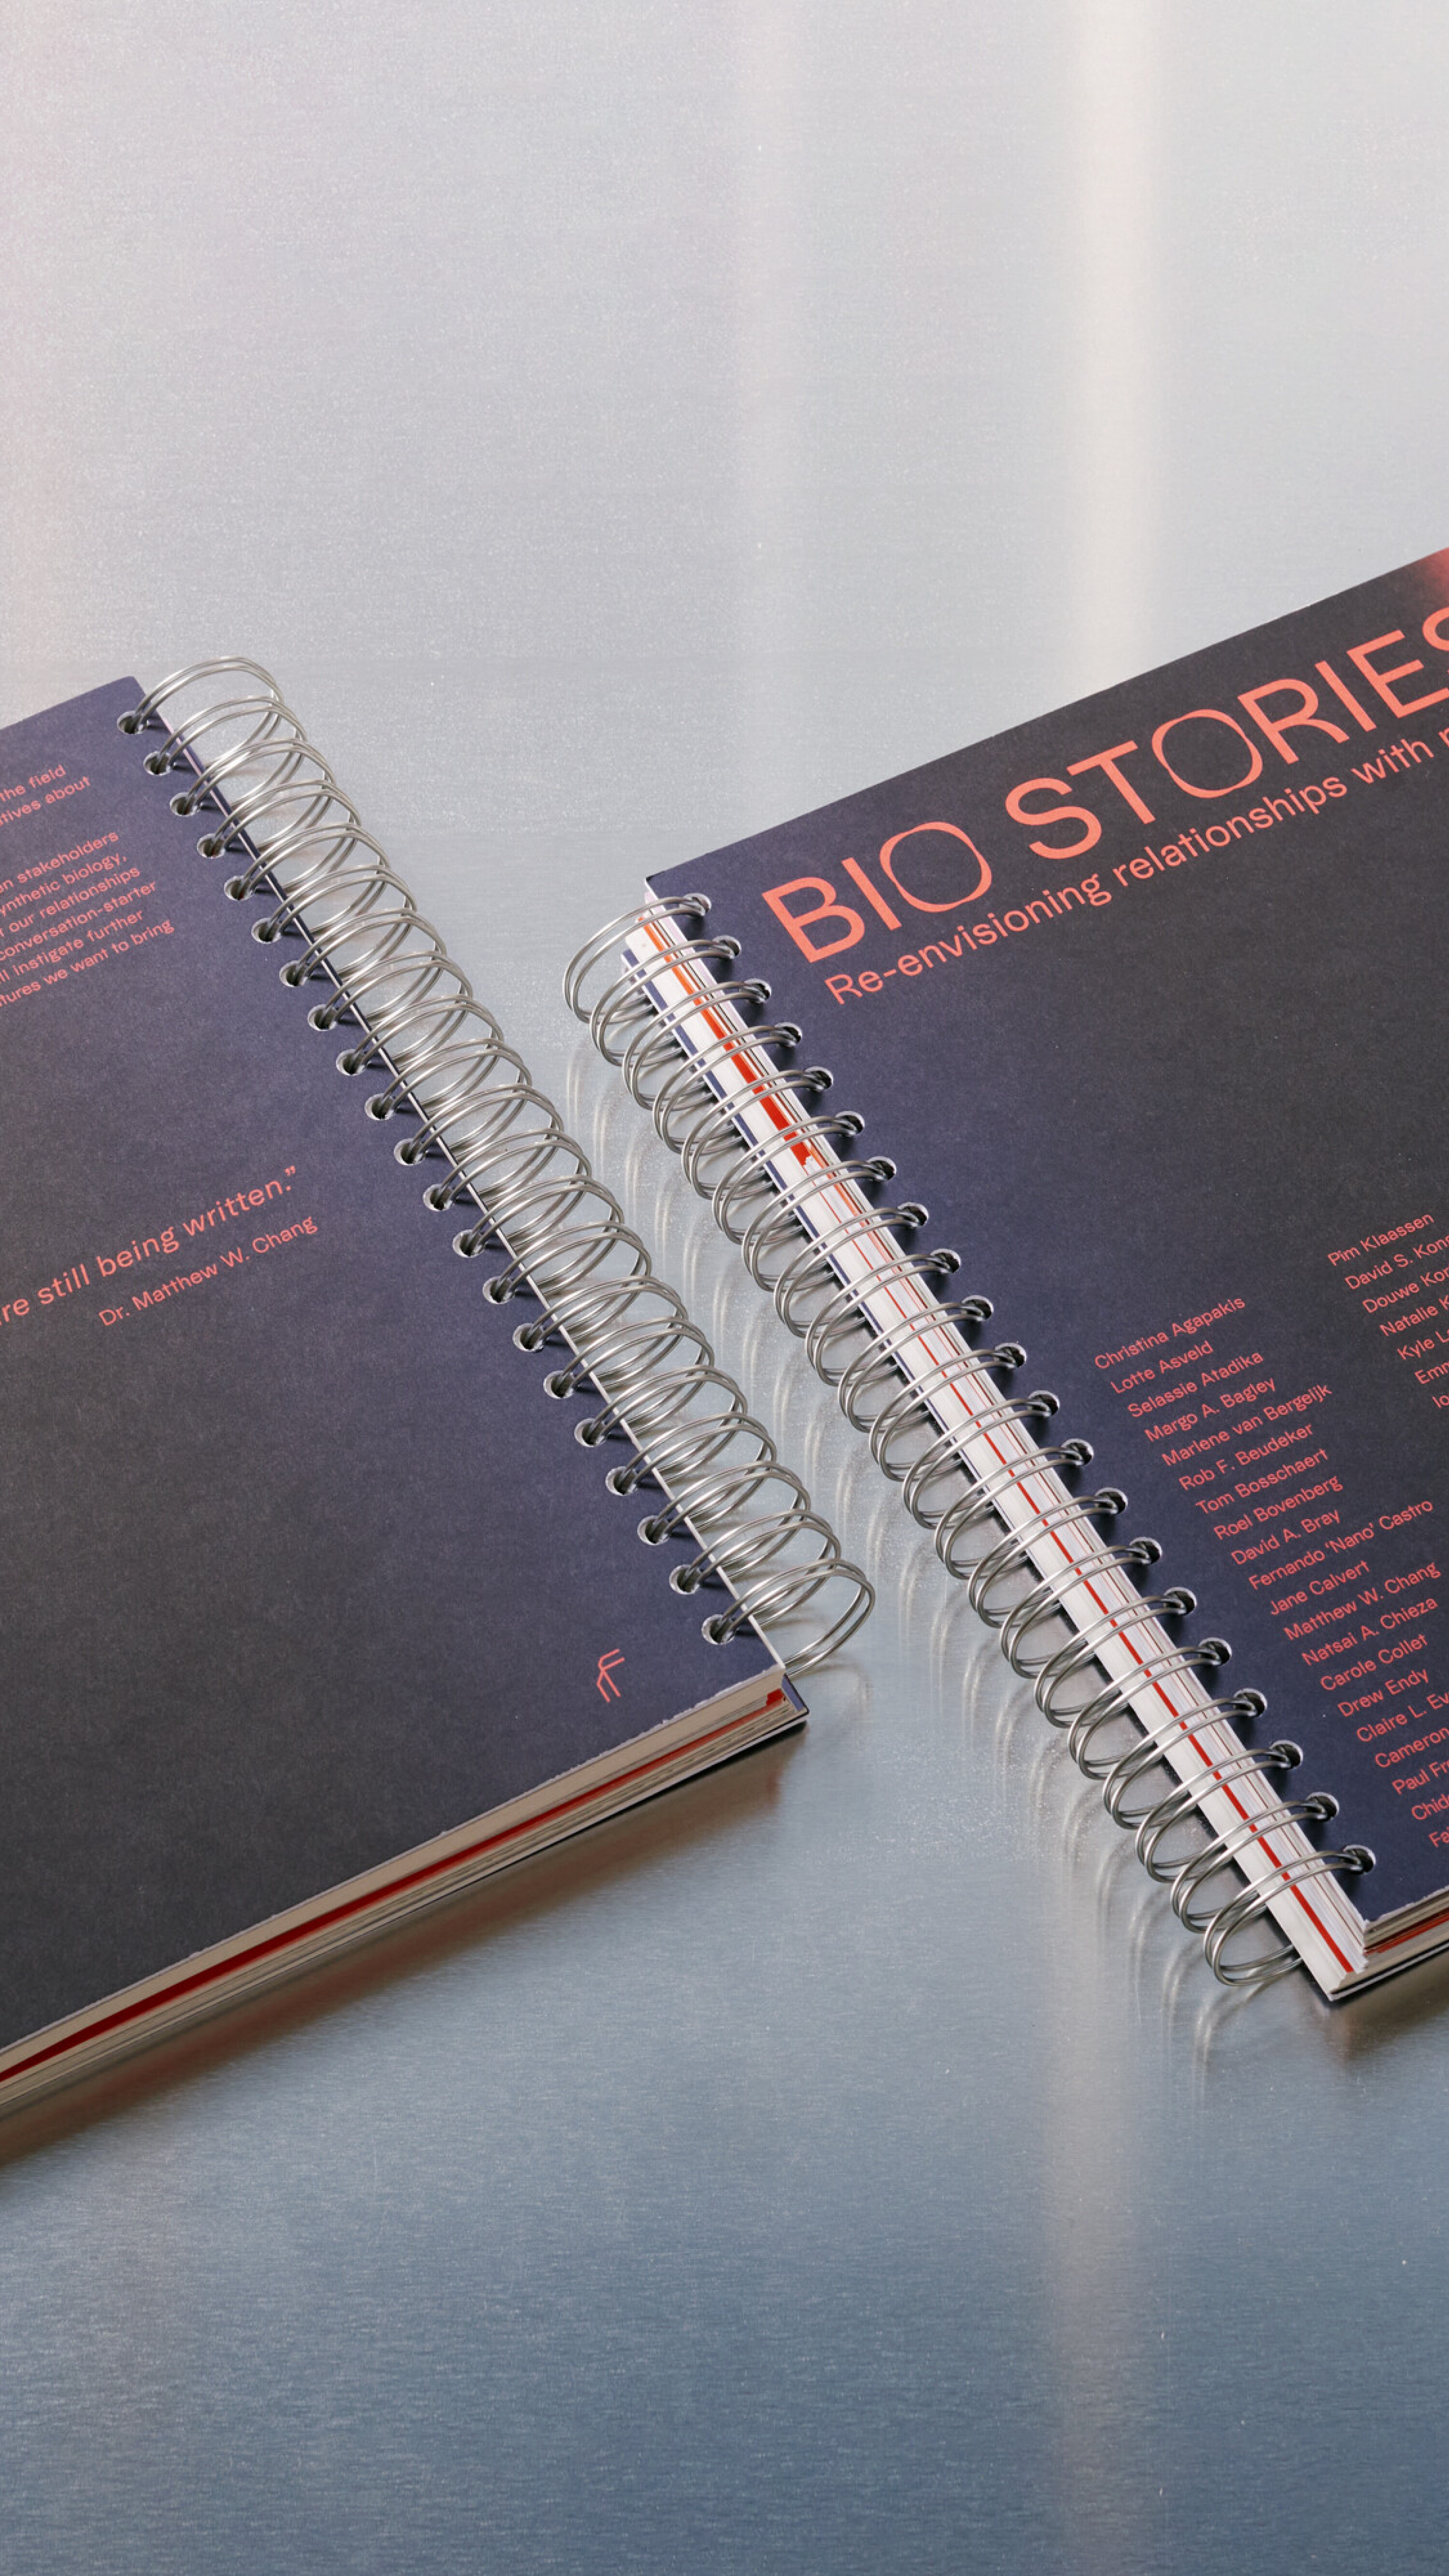 Bio Stories Publication, photo by Toby Coulson © Faber Futures